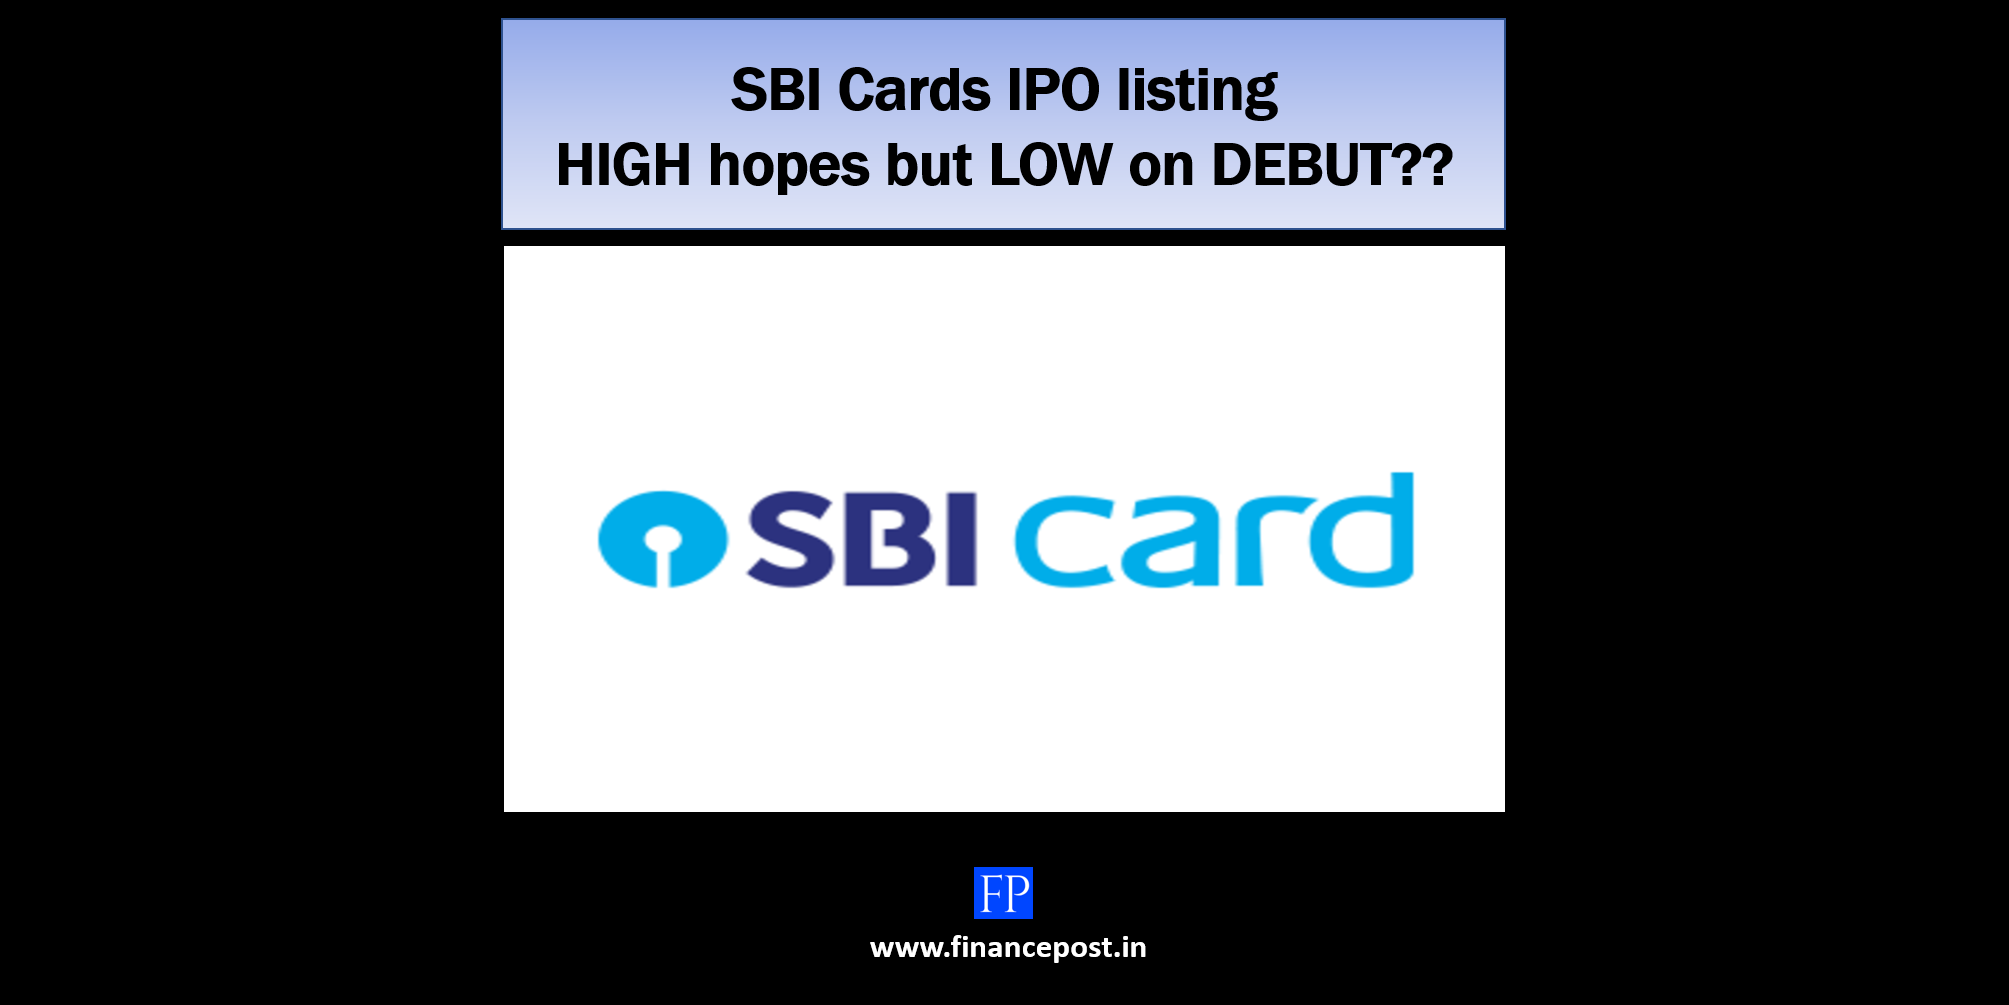 SBI Cards IPO listing – HIGH hopes but low on DEBUT??